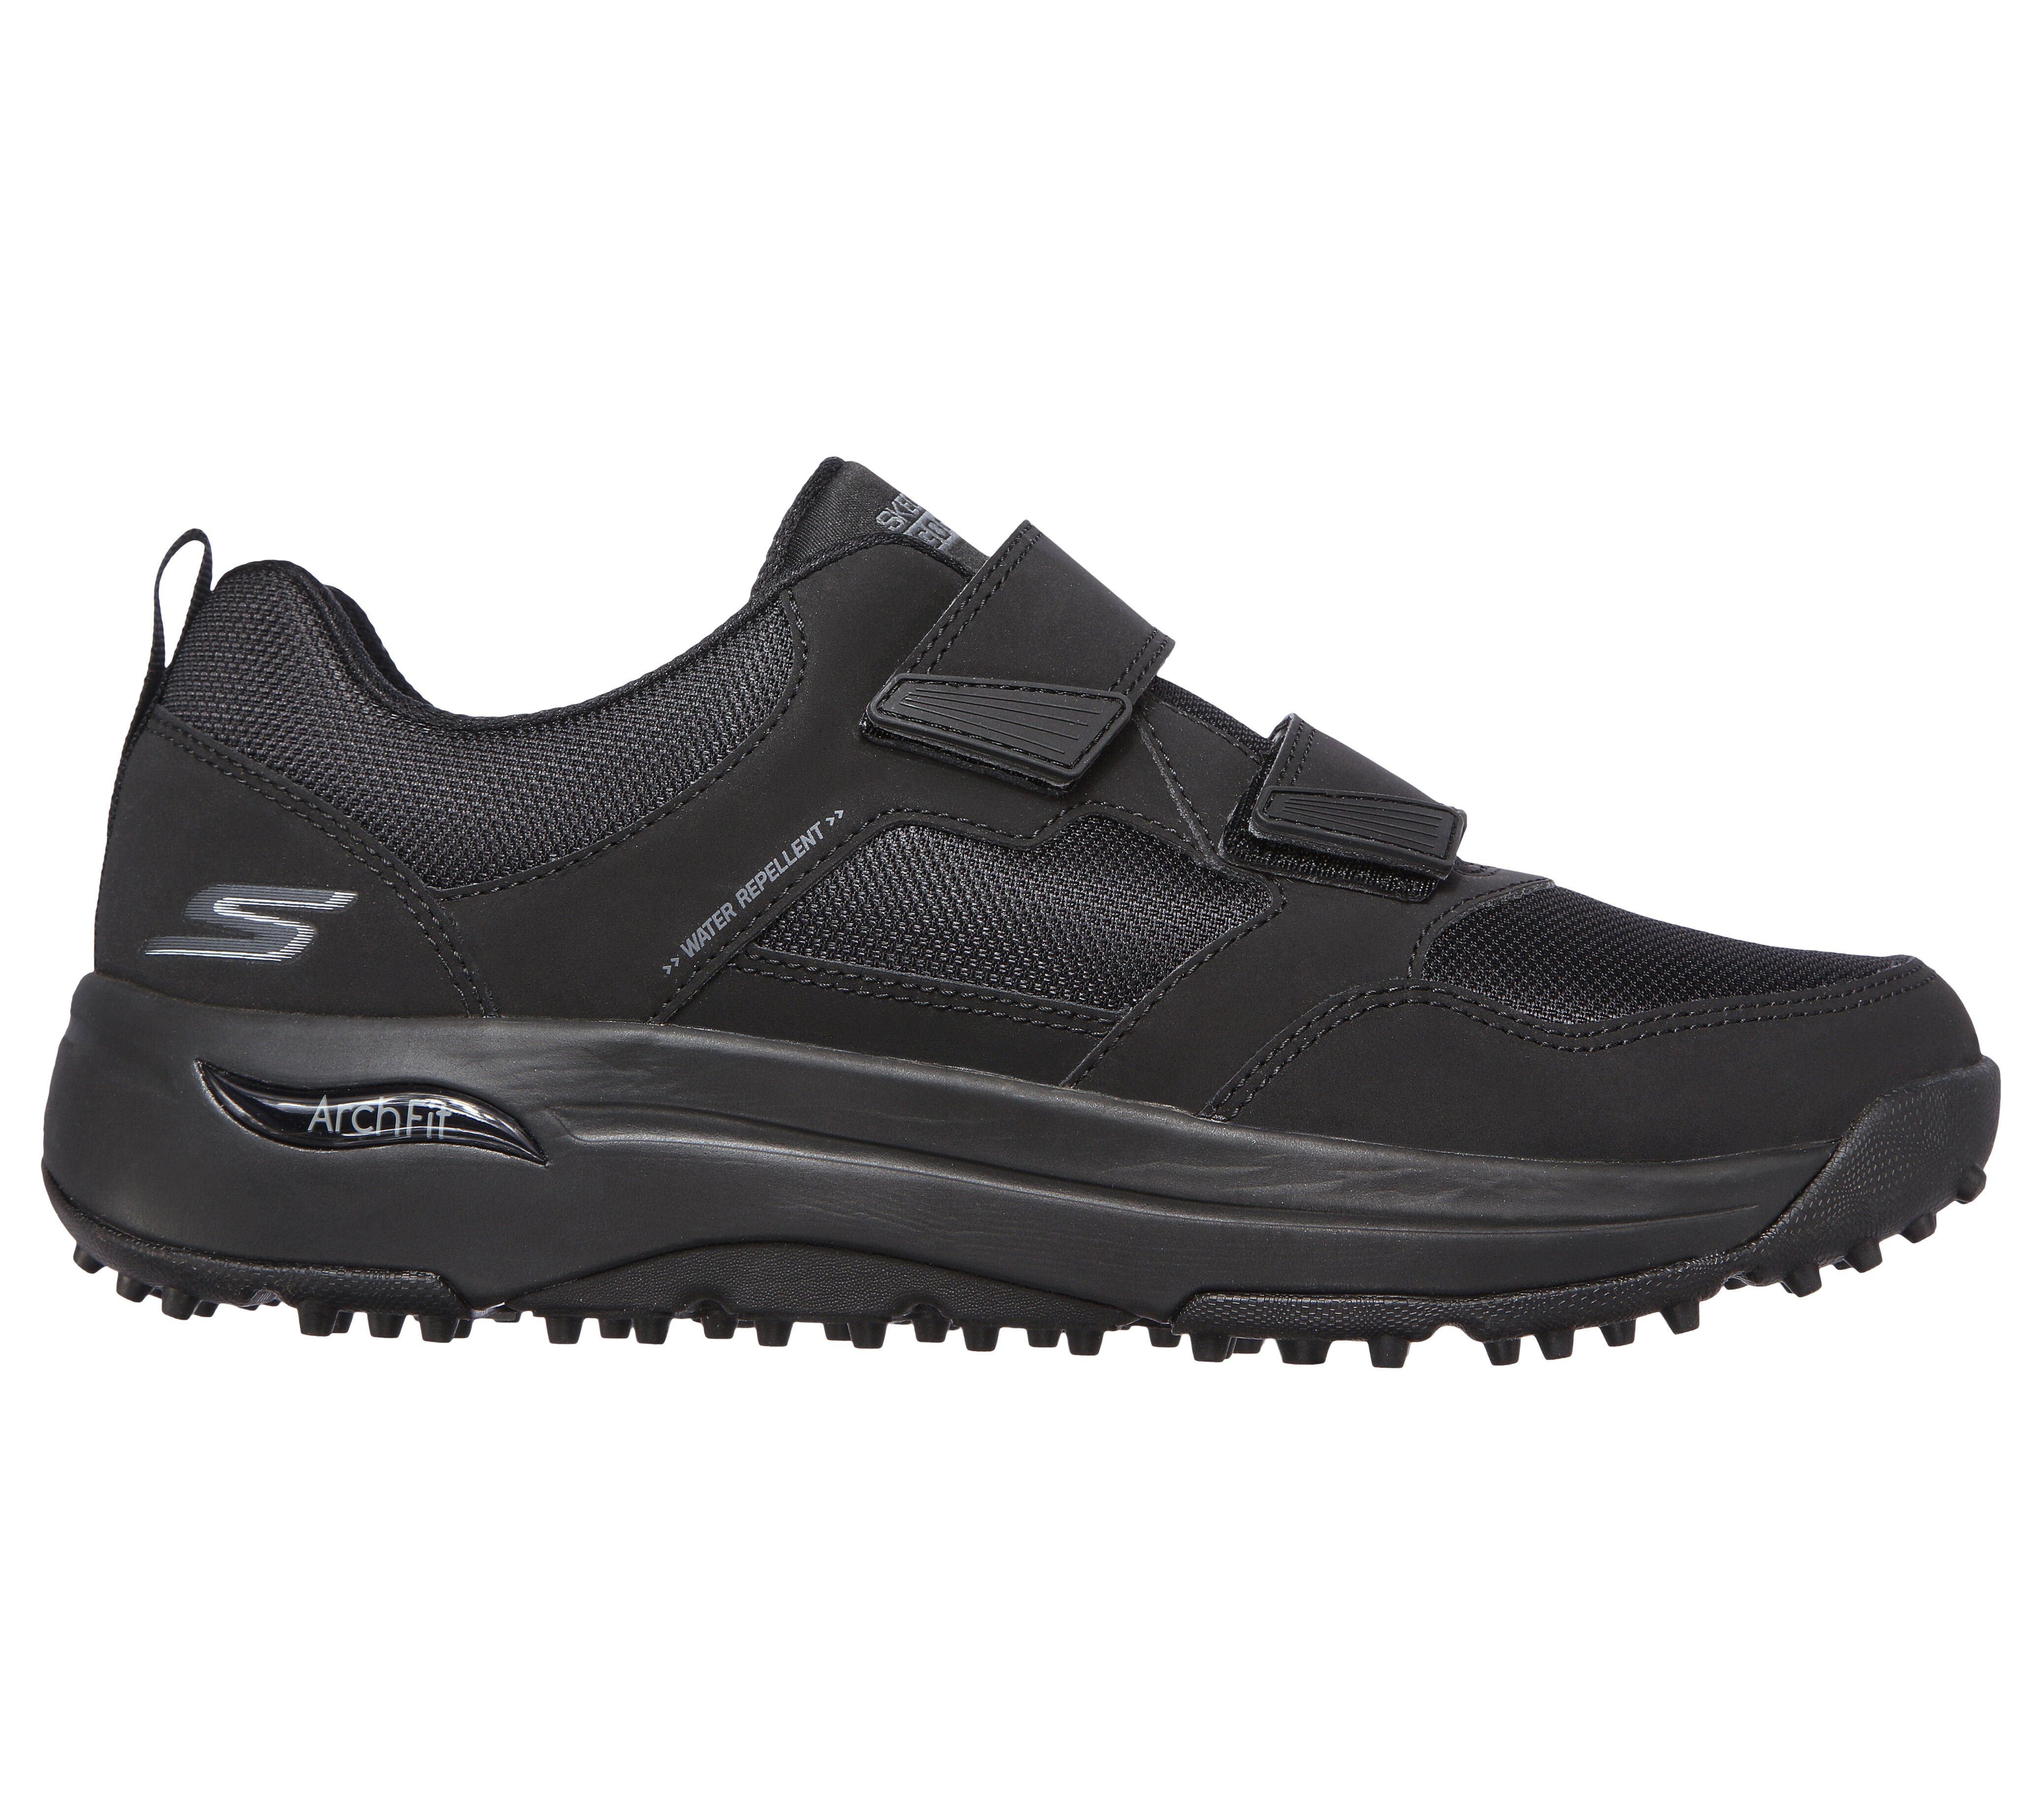 skechers extra wide fit golf shoes